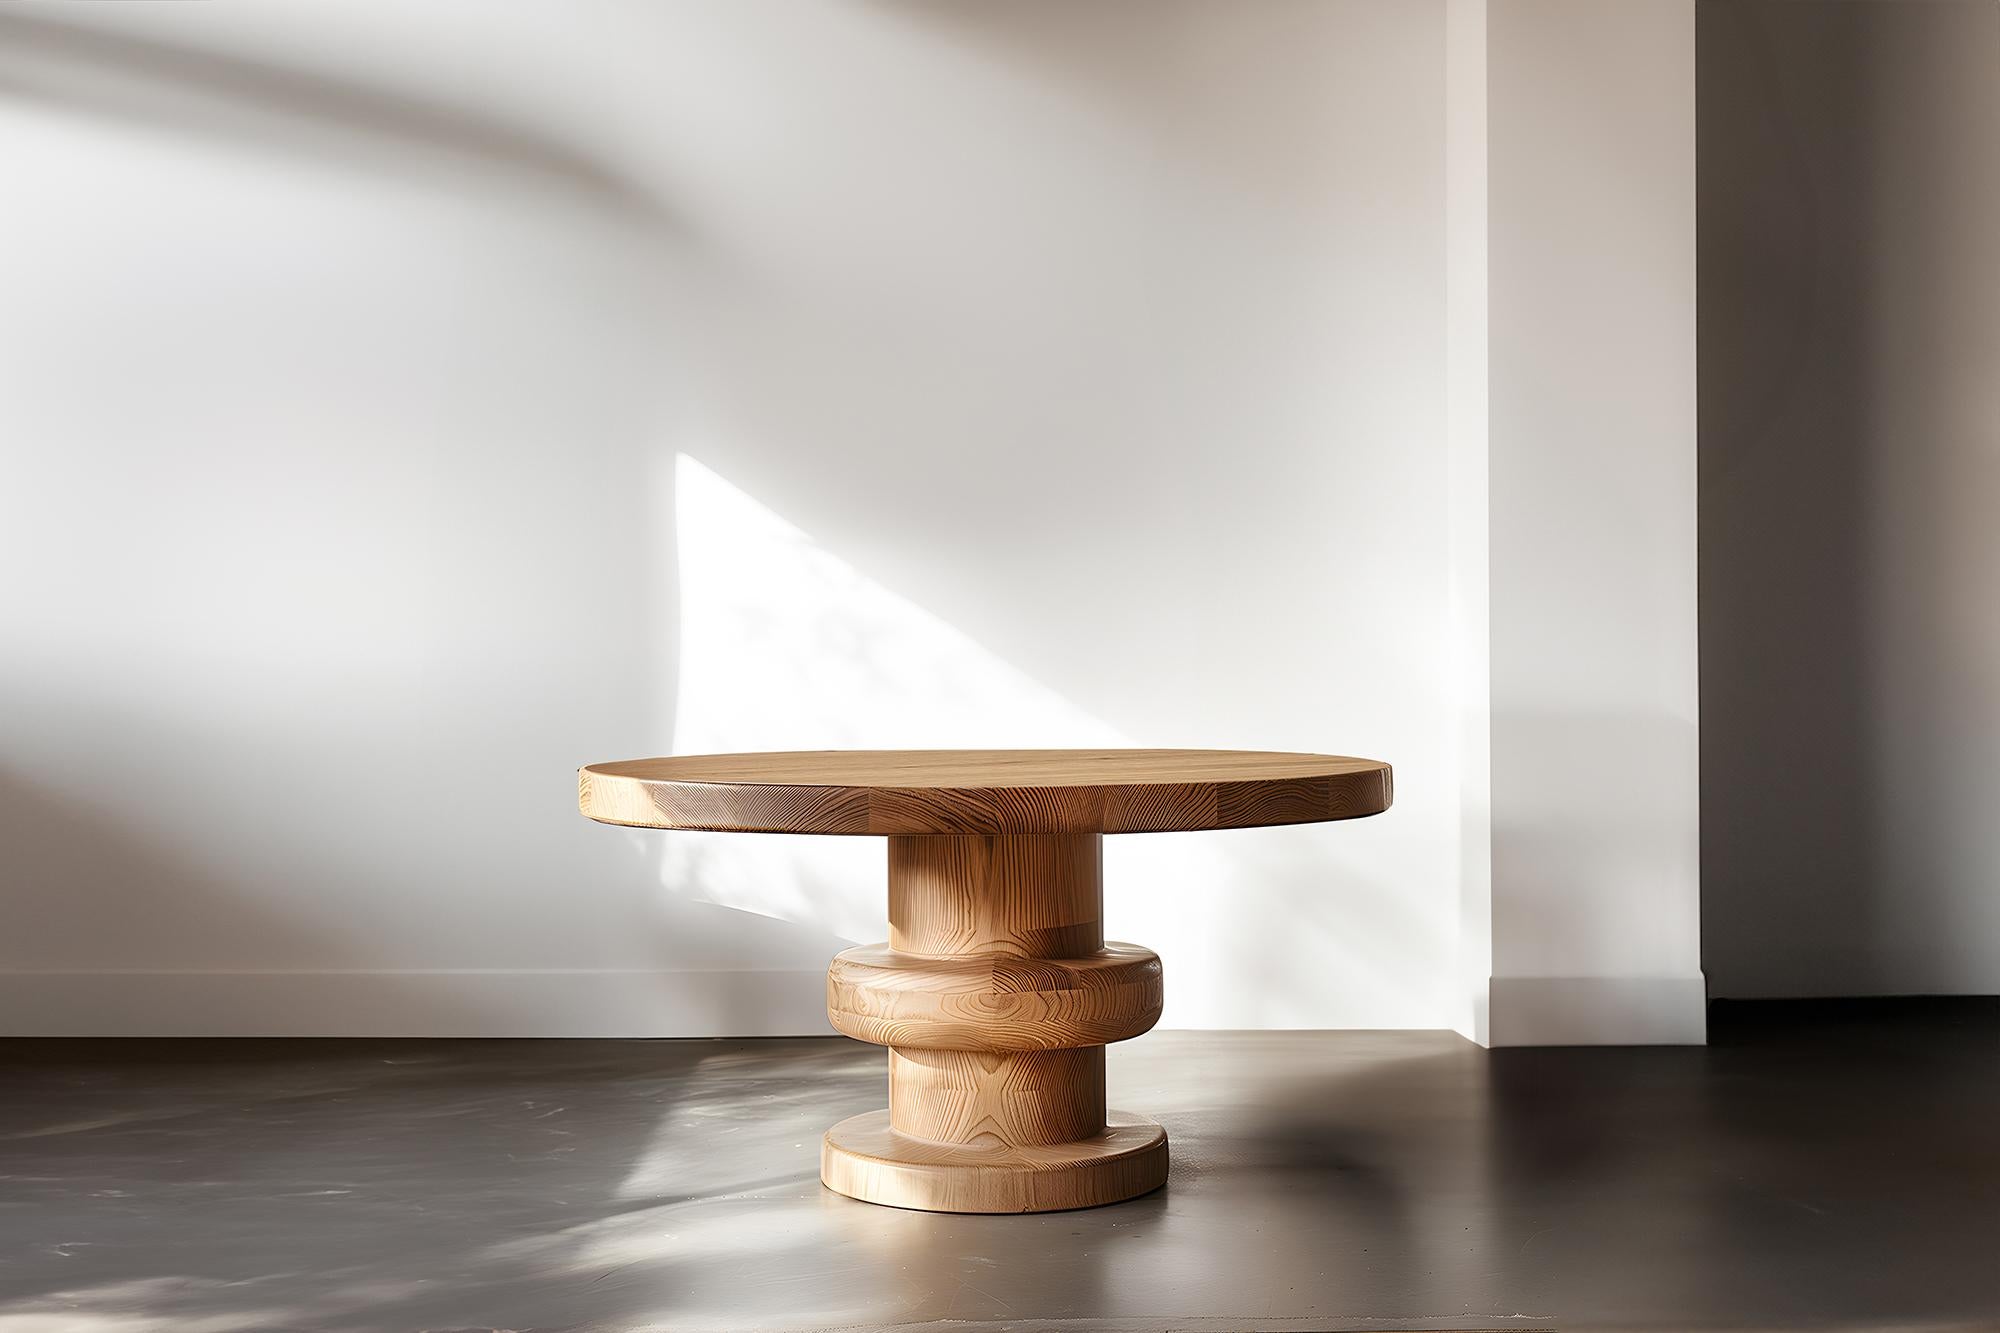 Dining Elegance No06, Socle Dining Room Tables, Crafted by NONO

——

Introducing the 